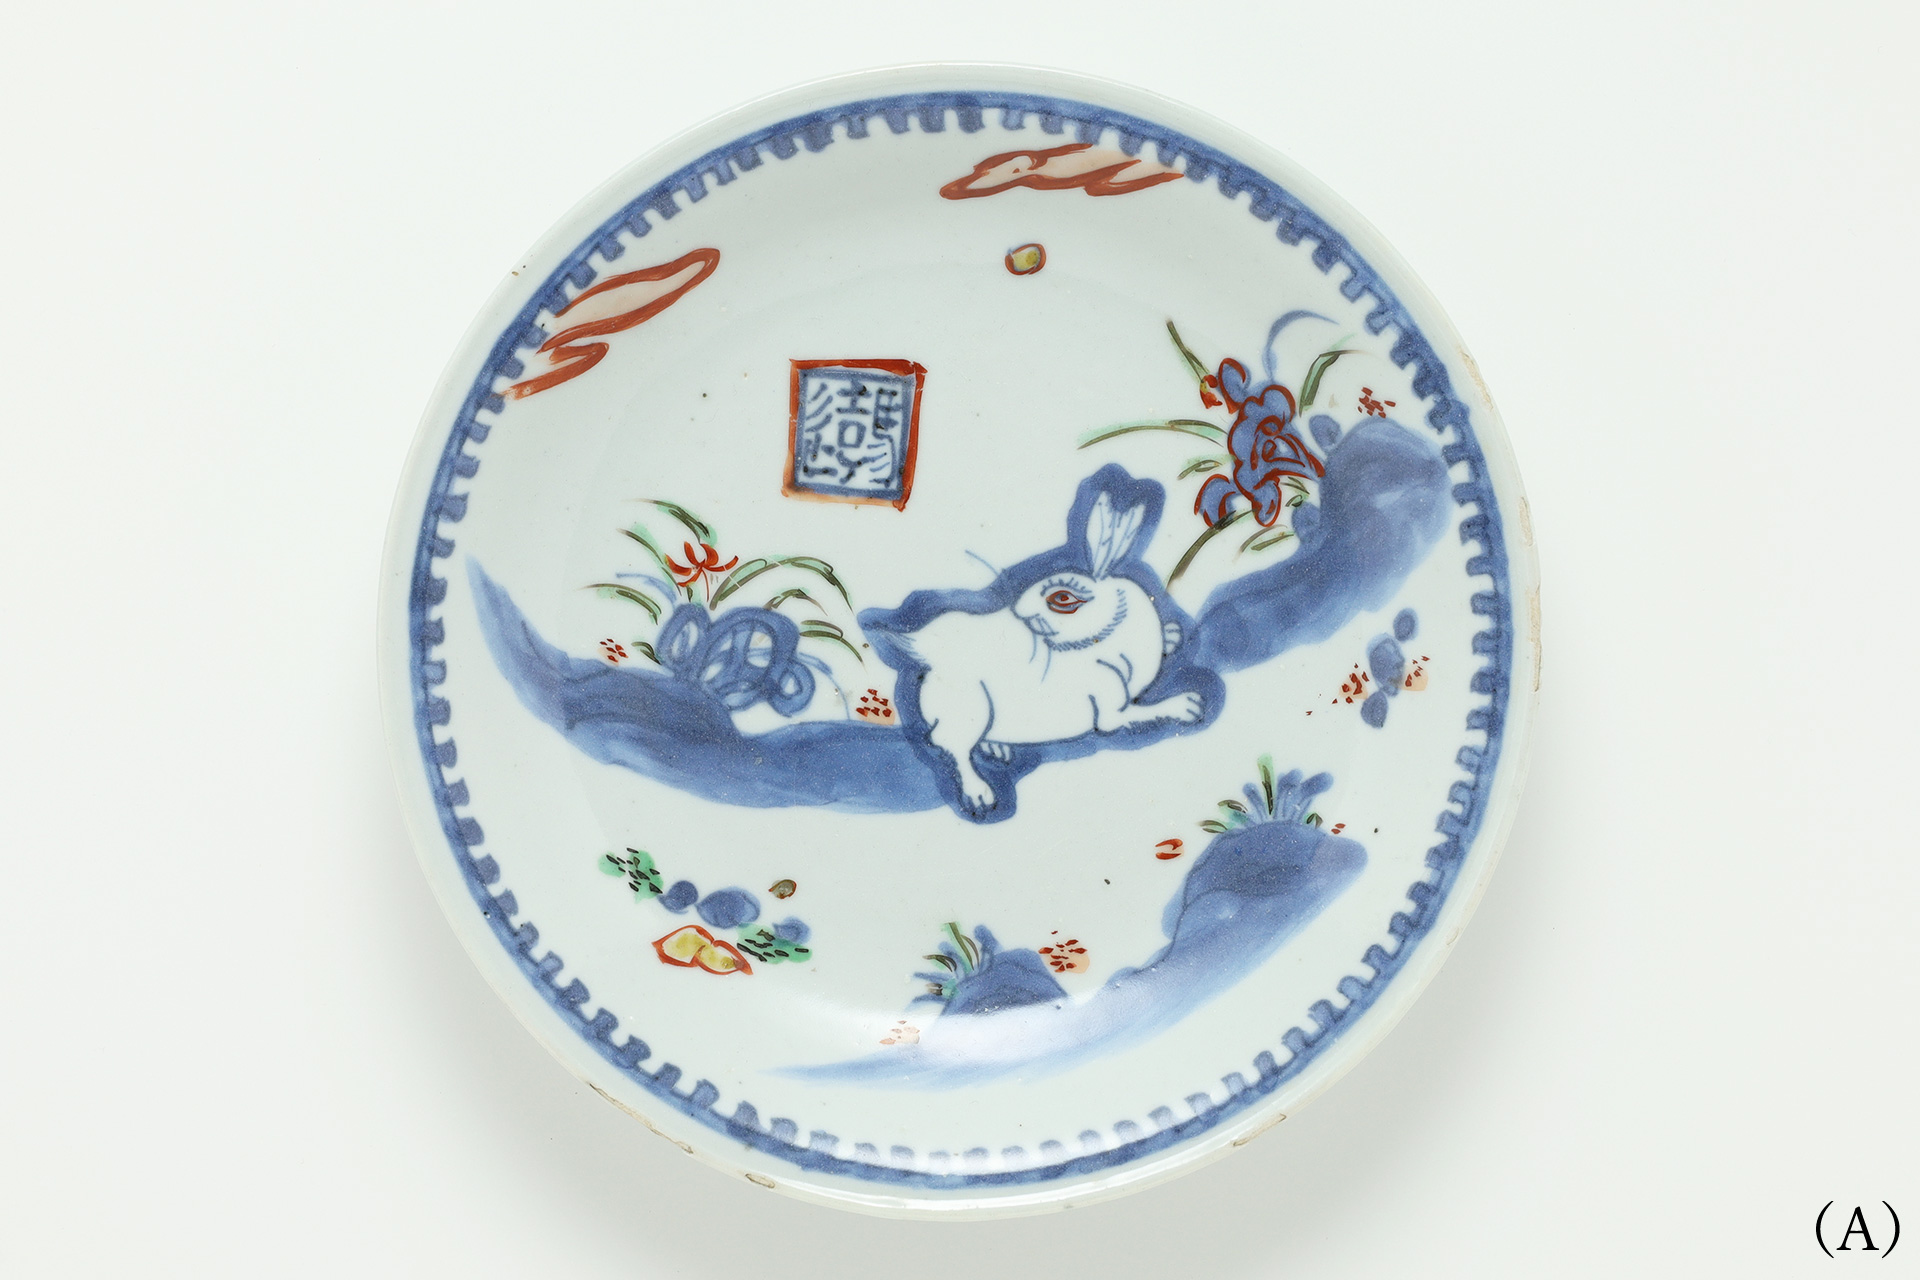 Tenkei-Akae Small Dish with Design of Rabbit（5 Pieces / Ming Dynasty）-1a